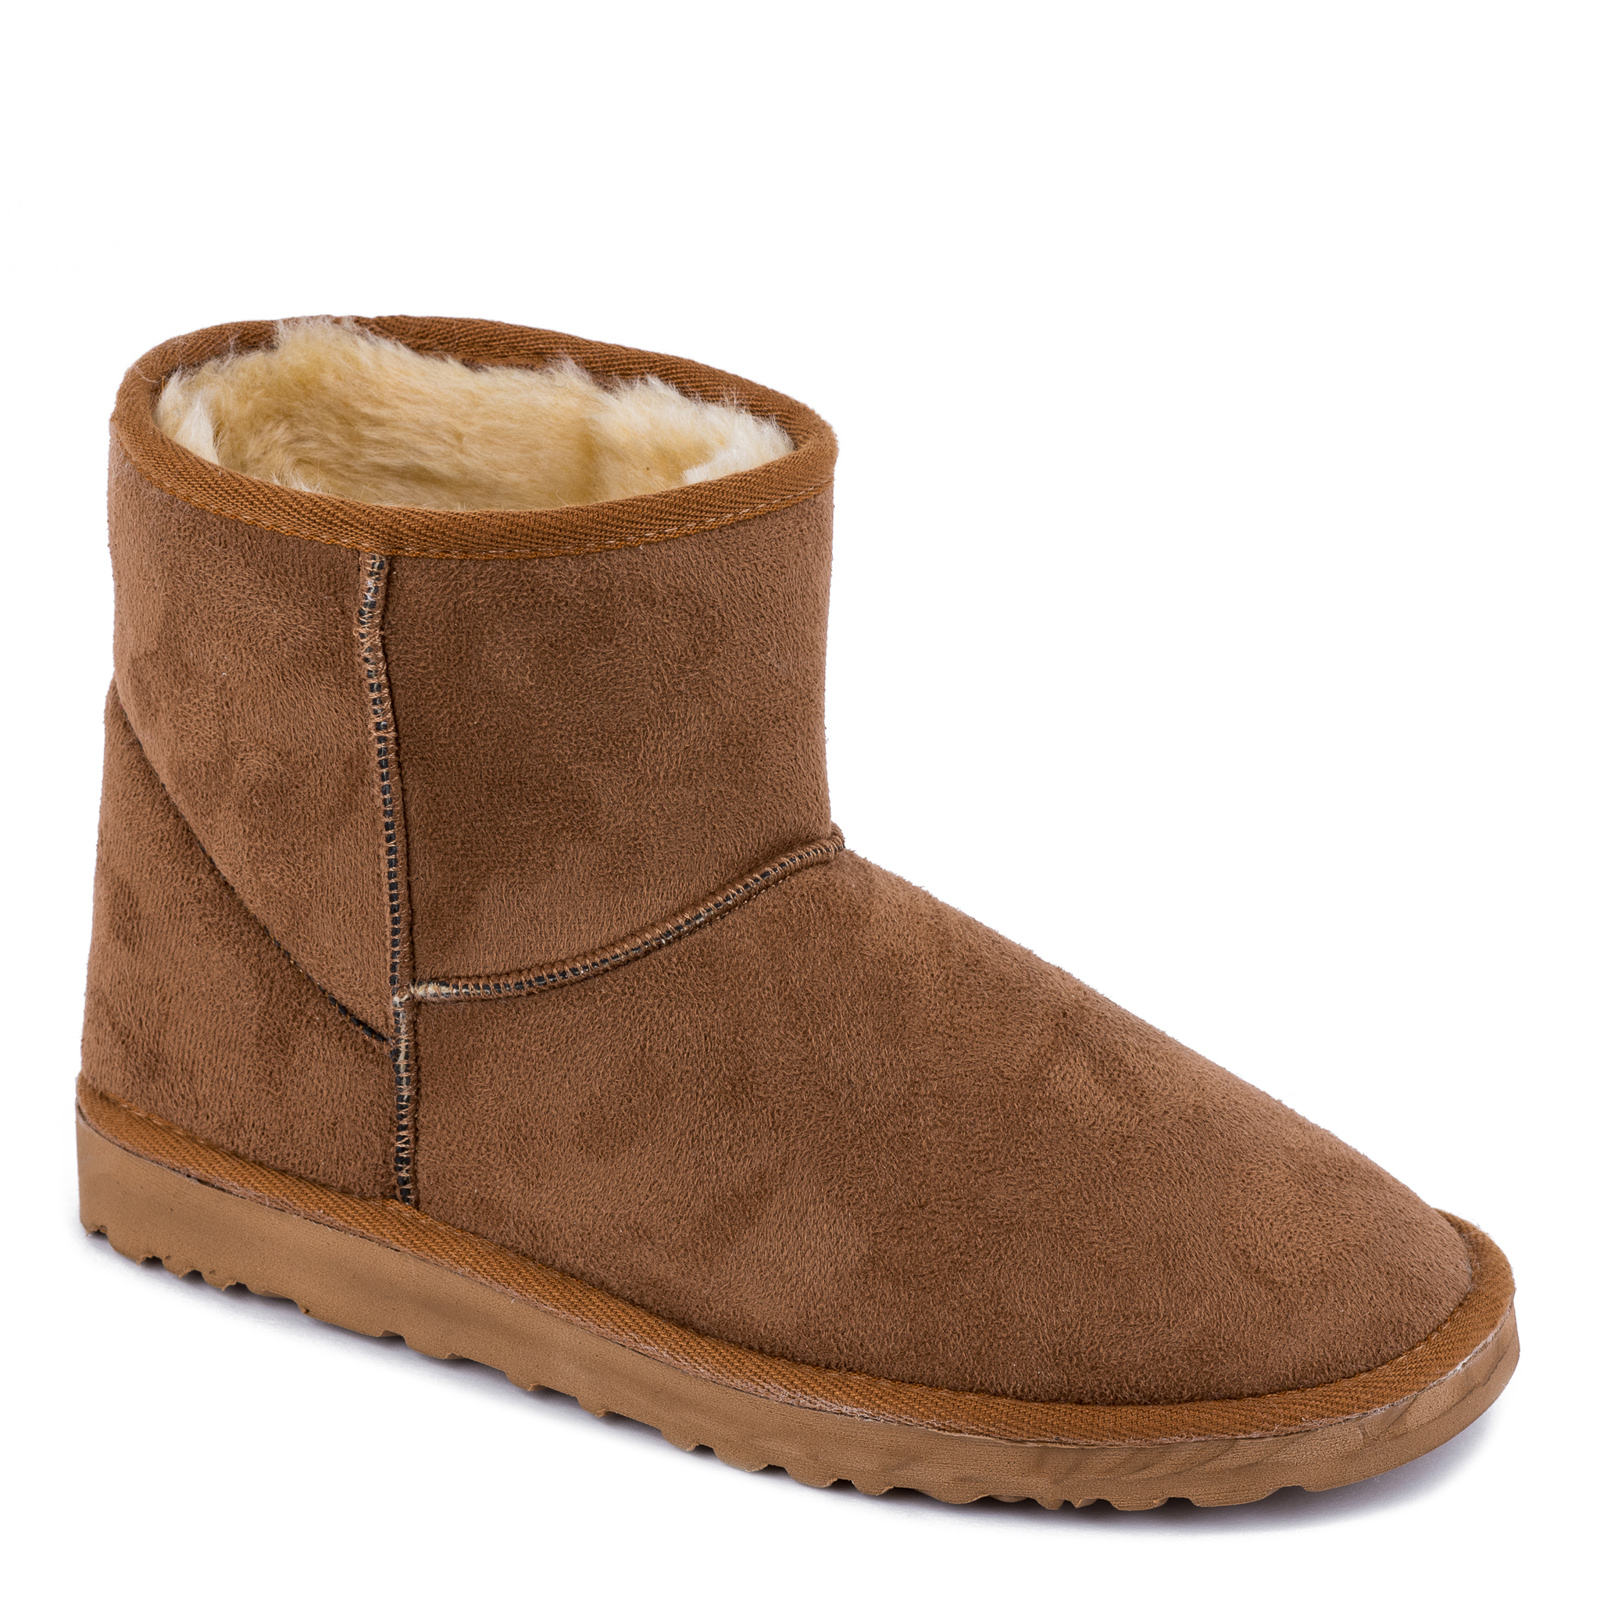 LOW SNOW BOOTS - CAMEL